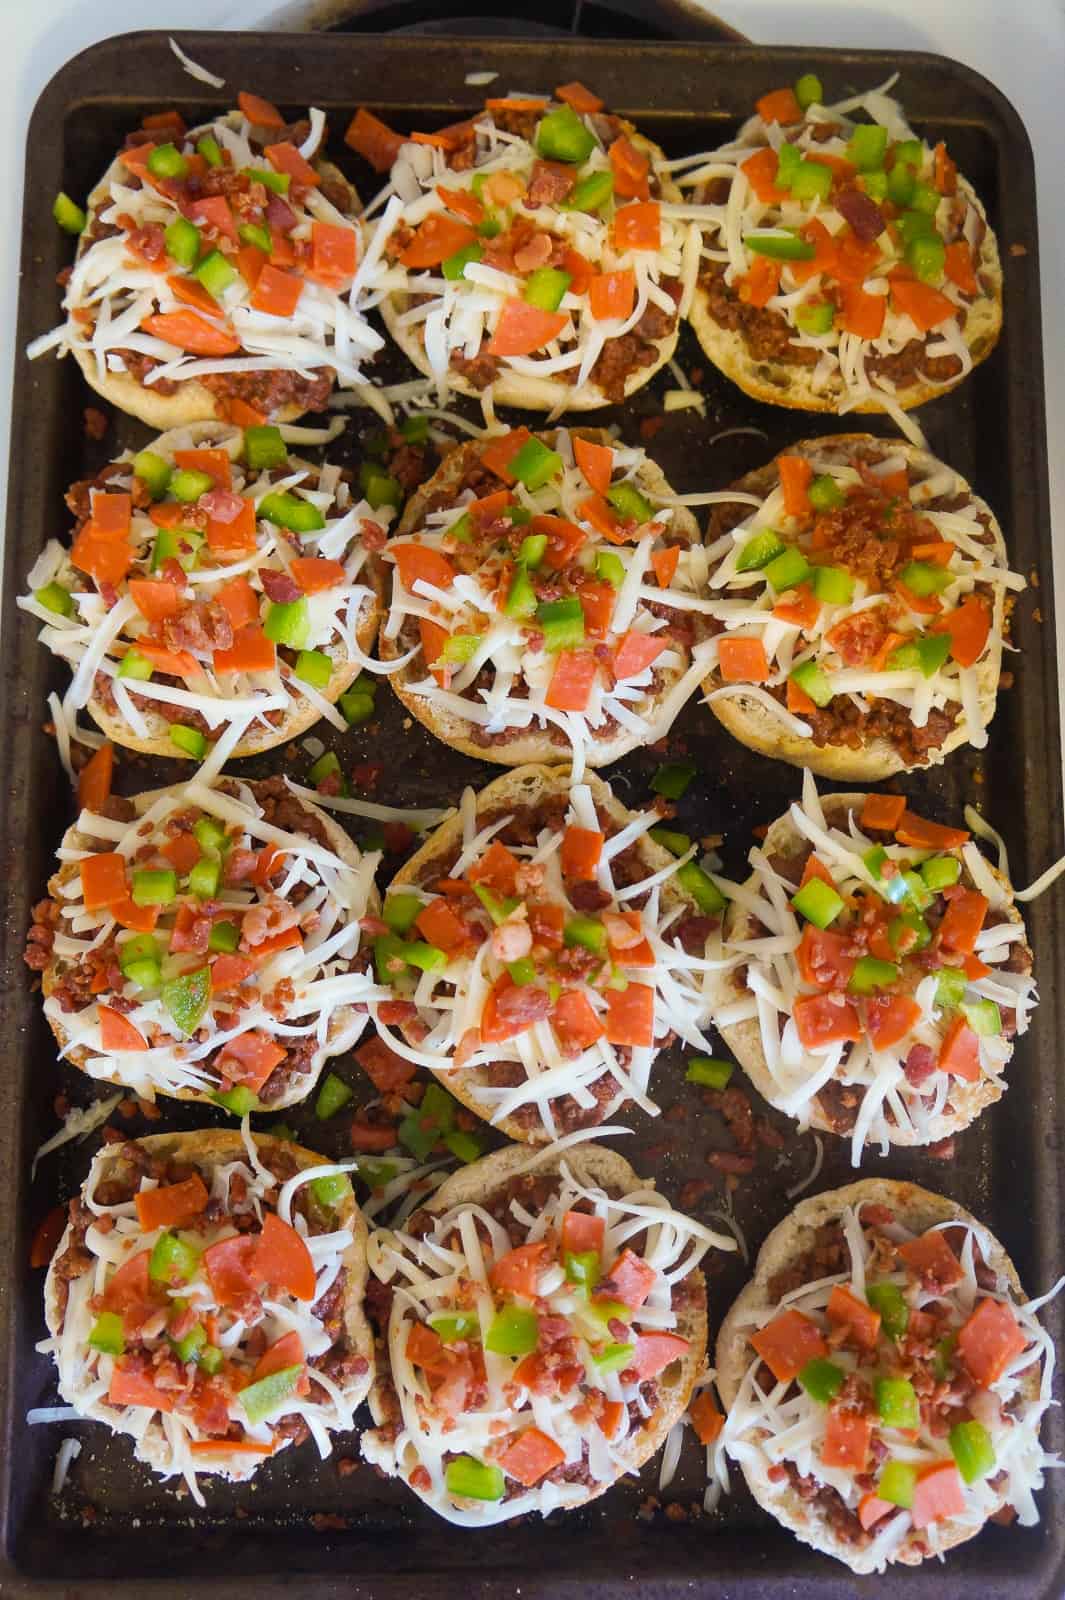 english muffin pizza burgers before baking